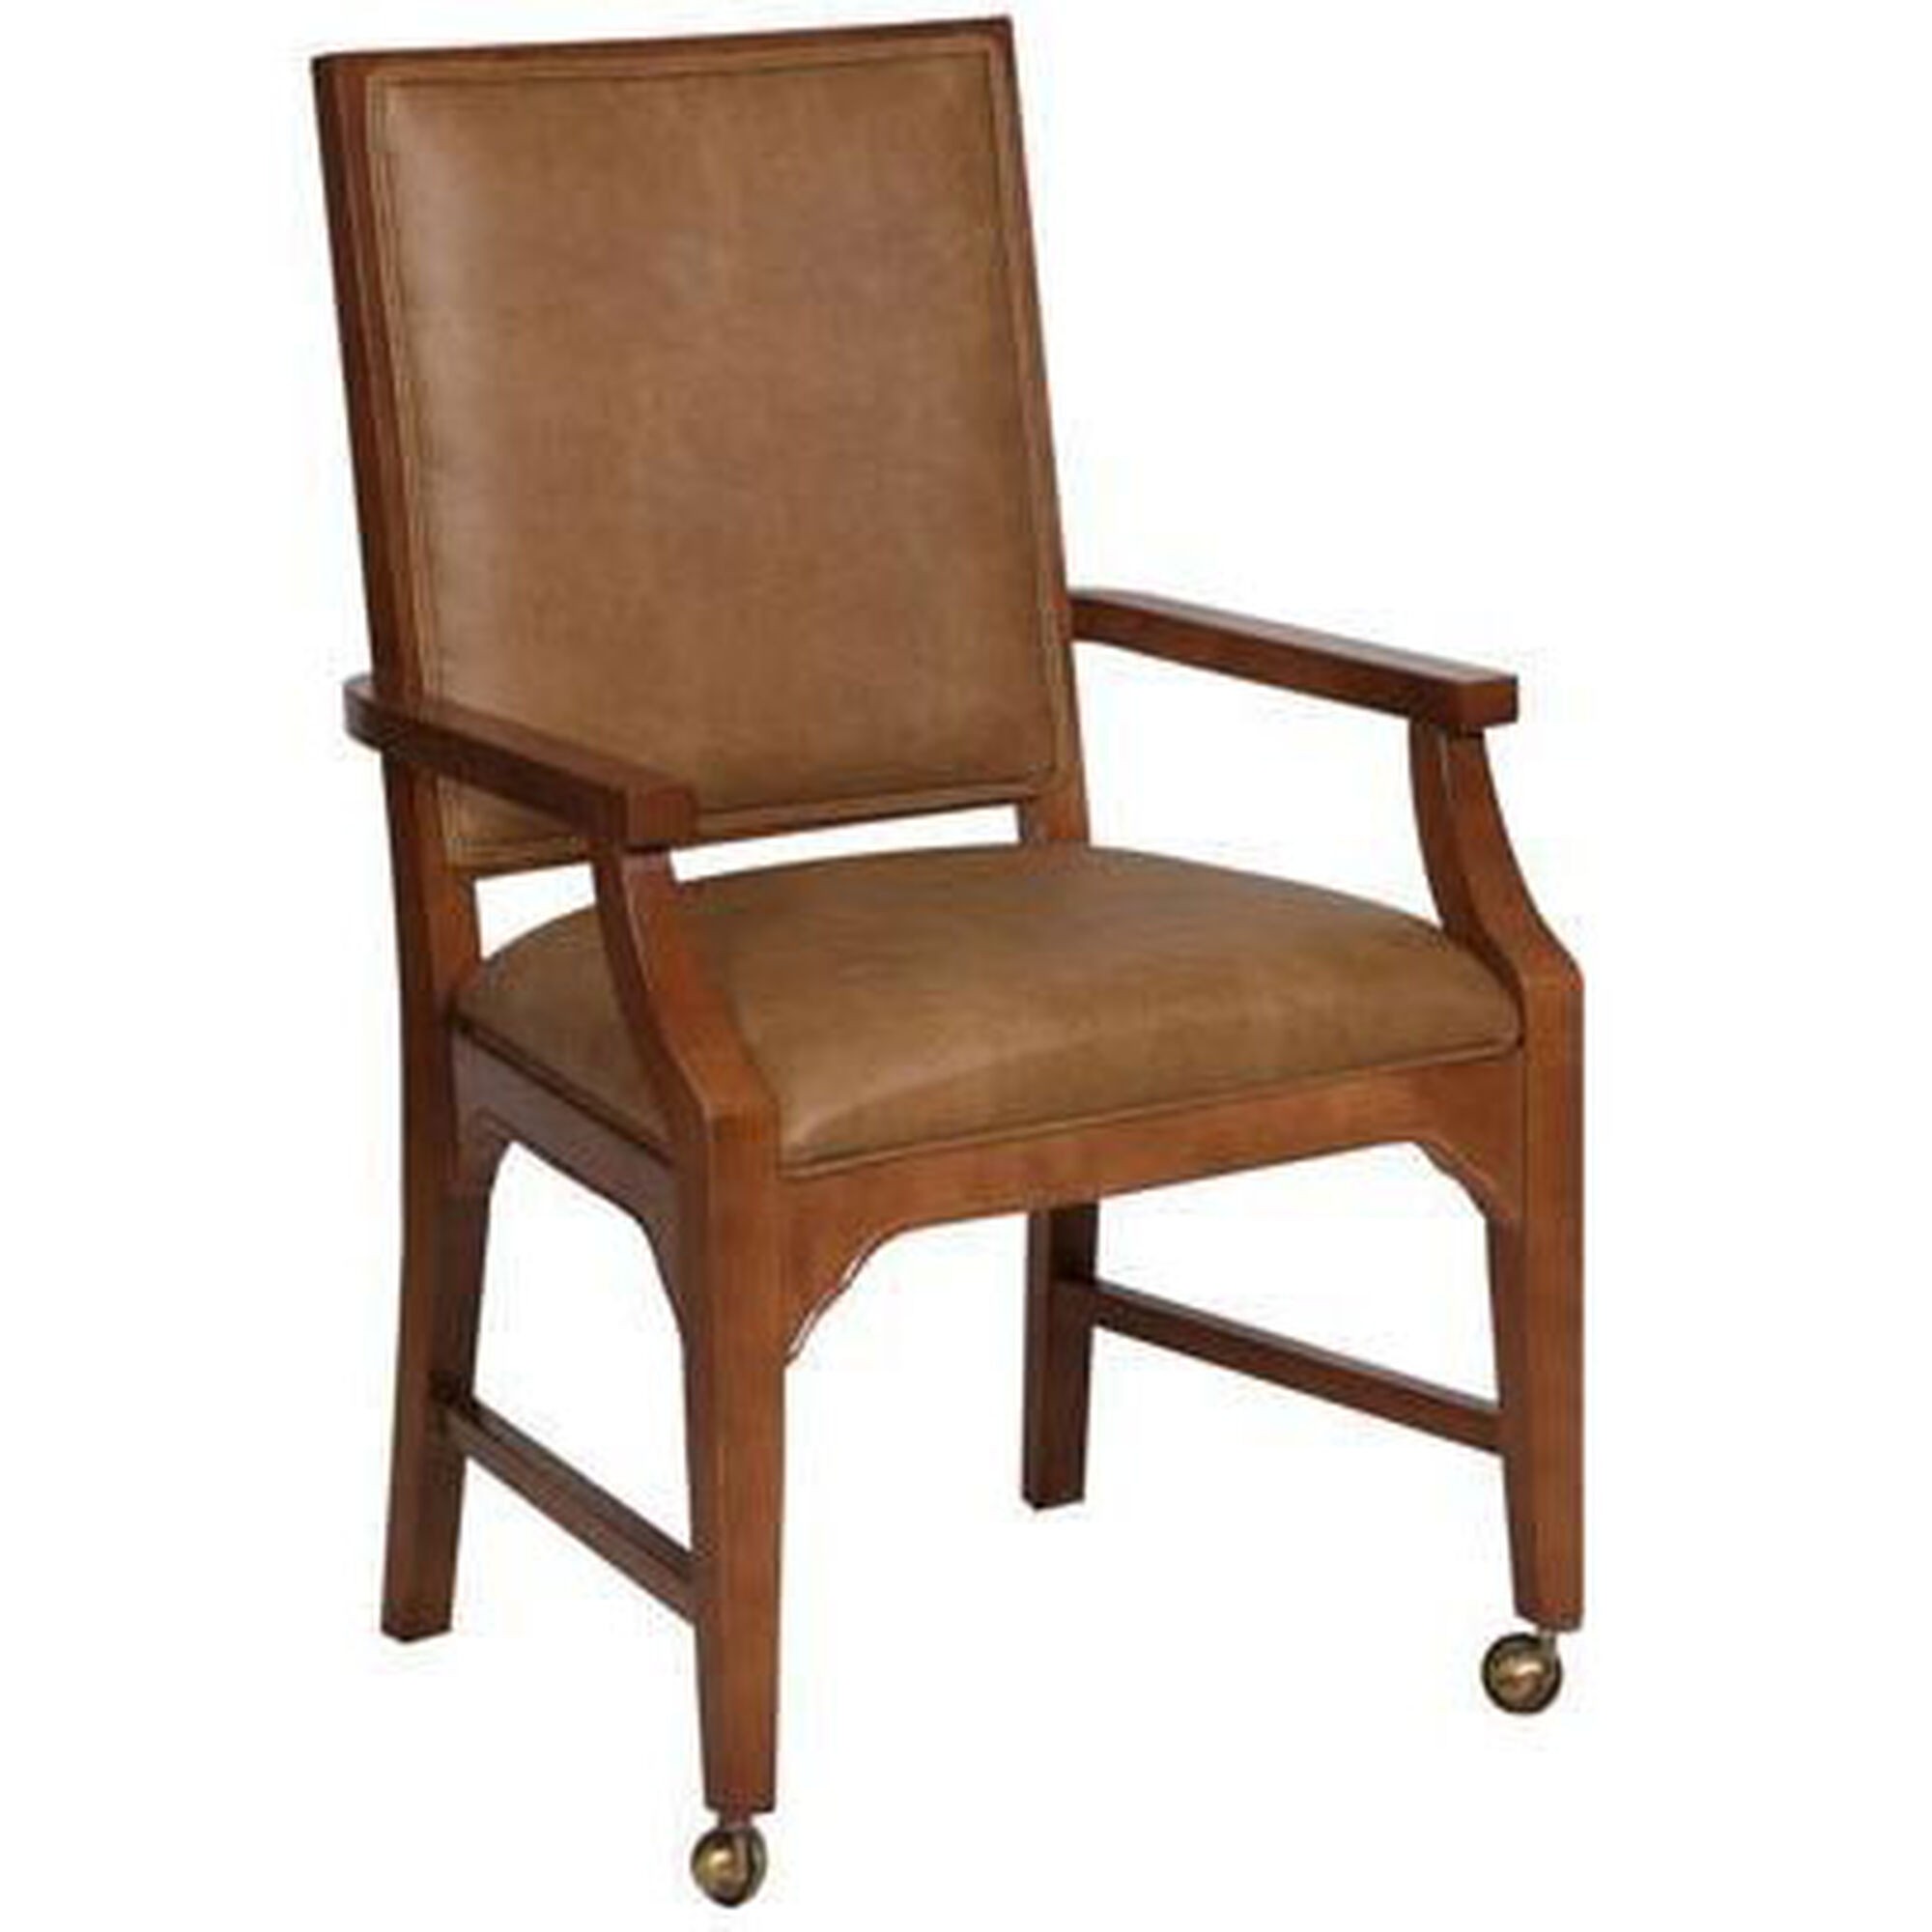 Ac furniture 4473 arm chair with casters by ac furniture